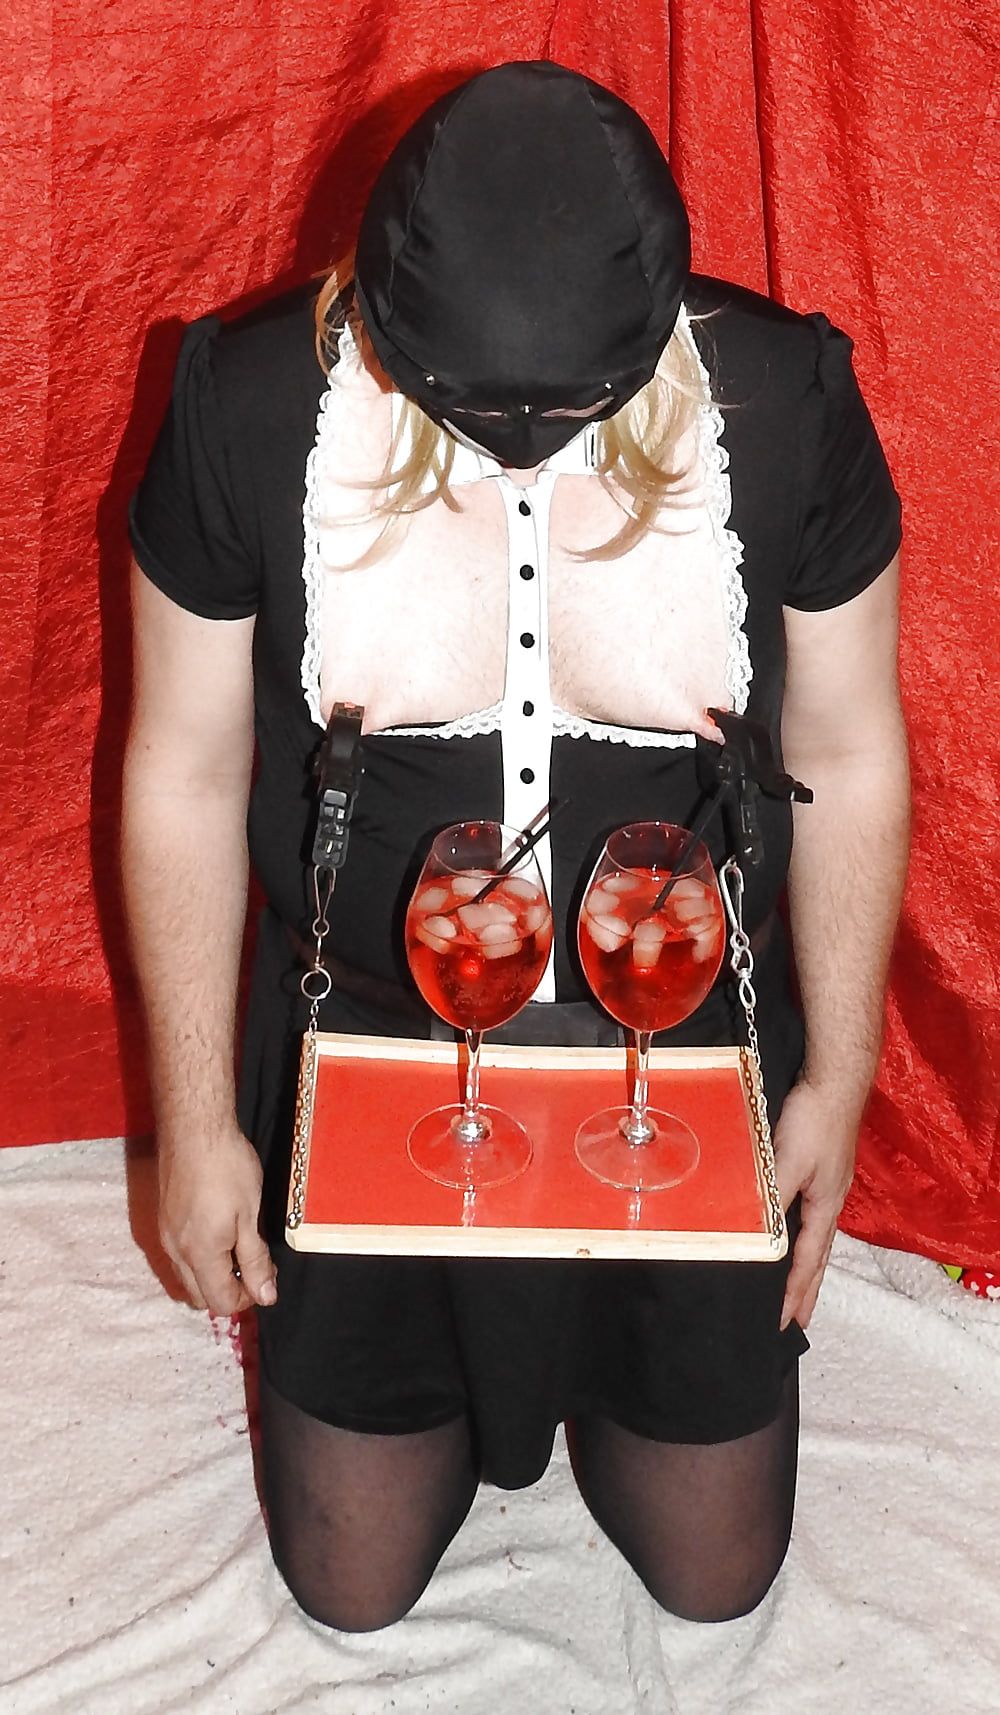 SissyMaid served cold drinks #13